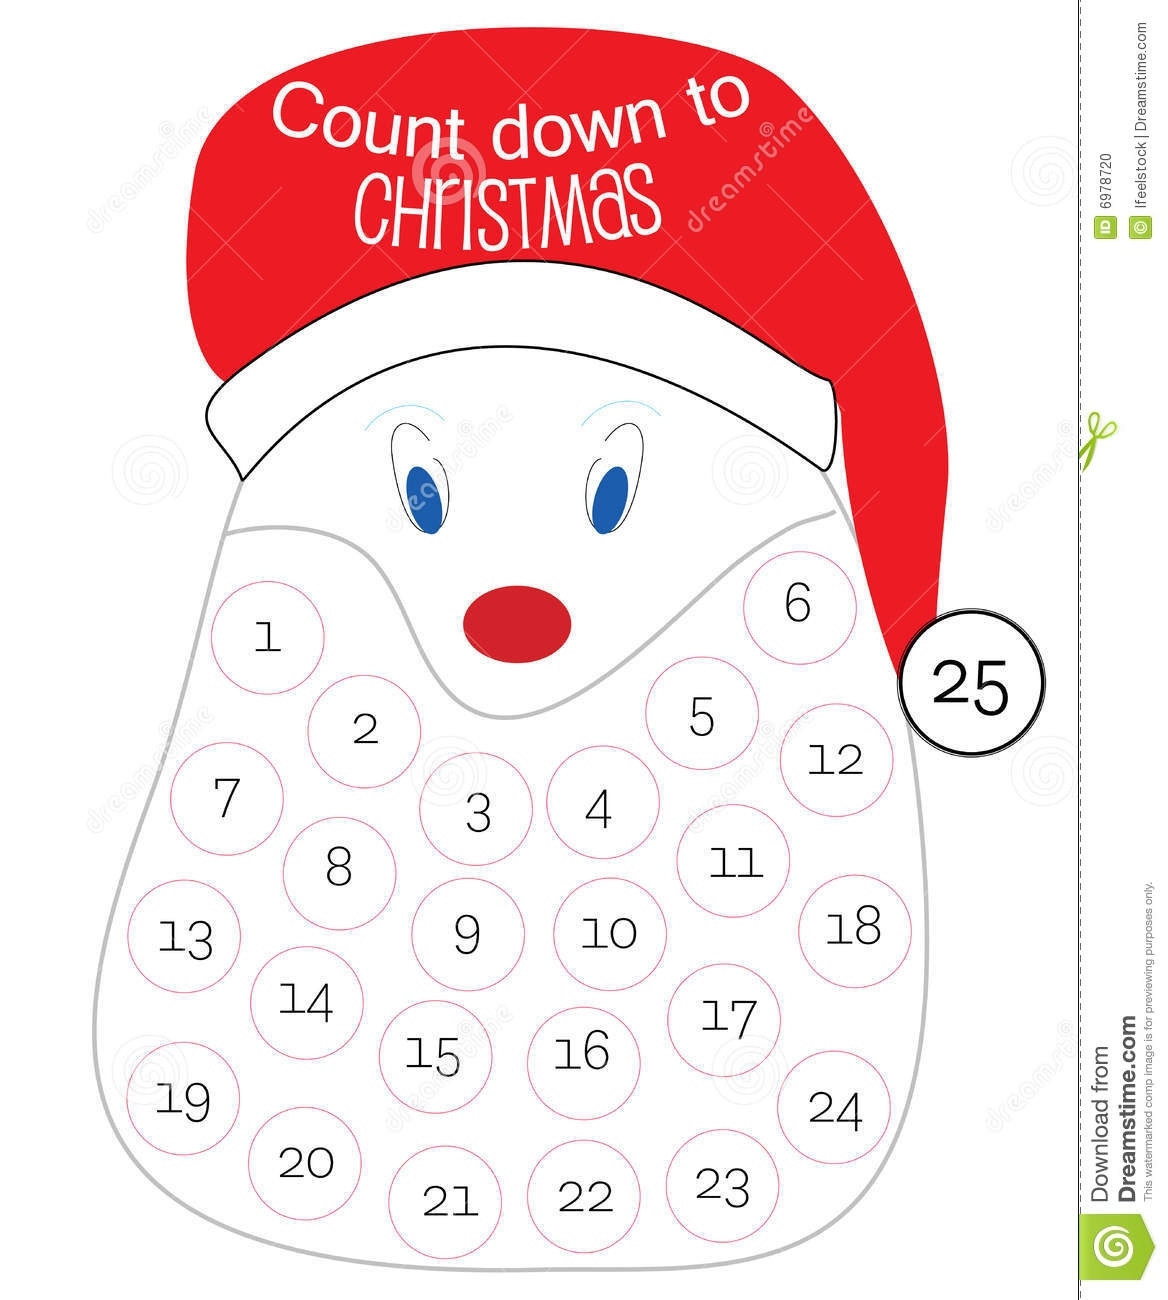 Countdown Till Christmas Stock Vector. Illustration Of Claus Countdown To Christmas Calendar Online